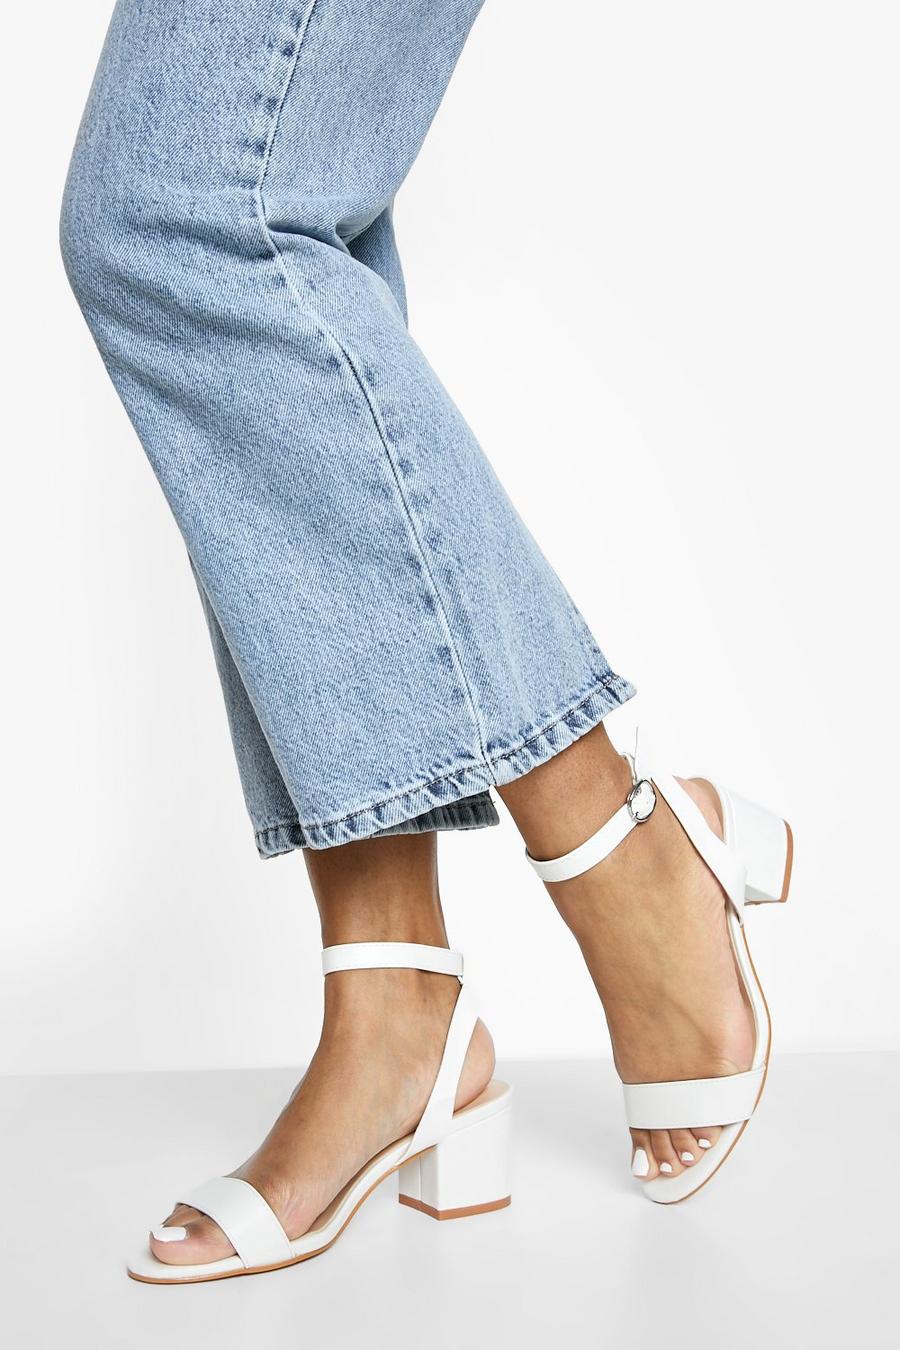 White weiß Low Block Barely There Heels